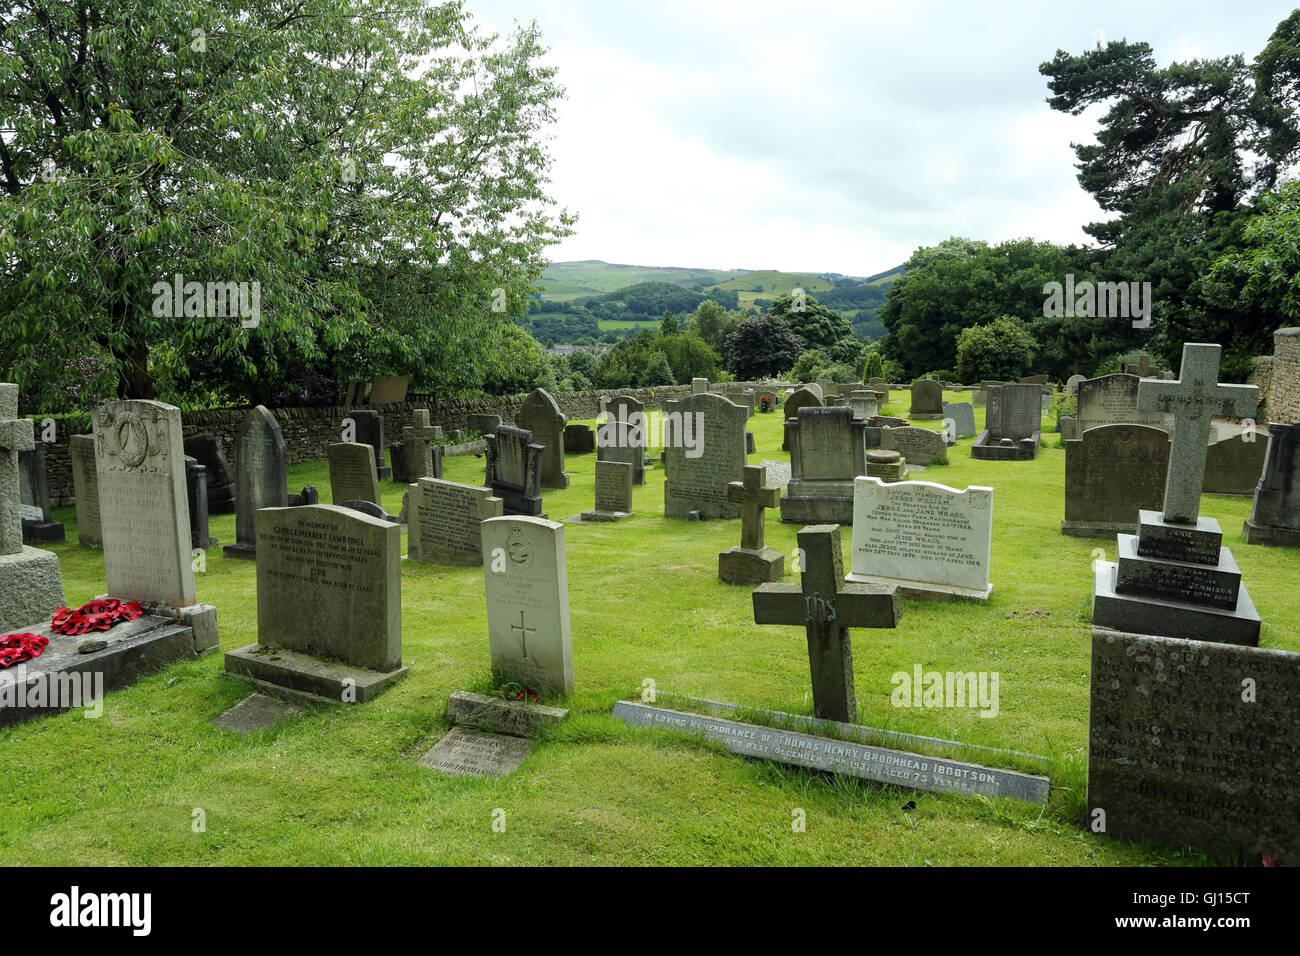 Graveyard at St. Michael and All Angels Church, Hathersage, Peak District, Derbyshire, England, UK Stock Photo